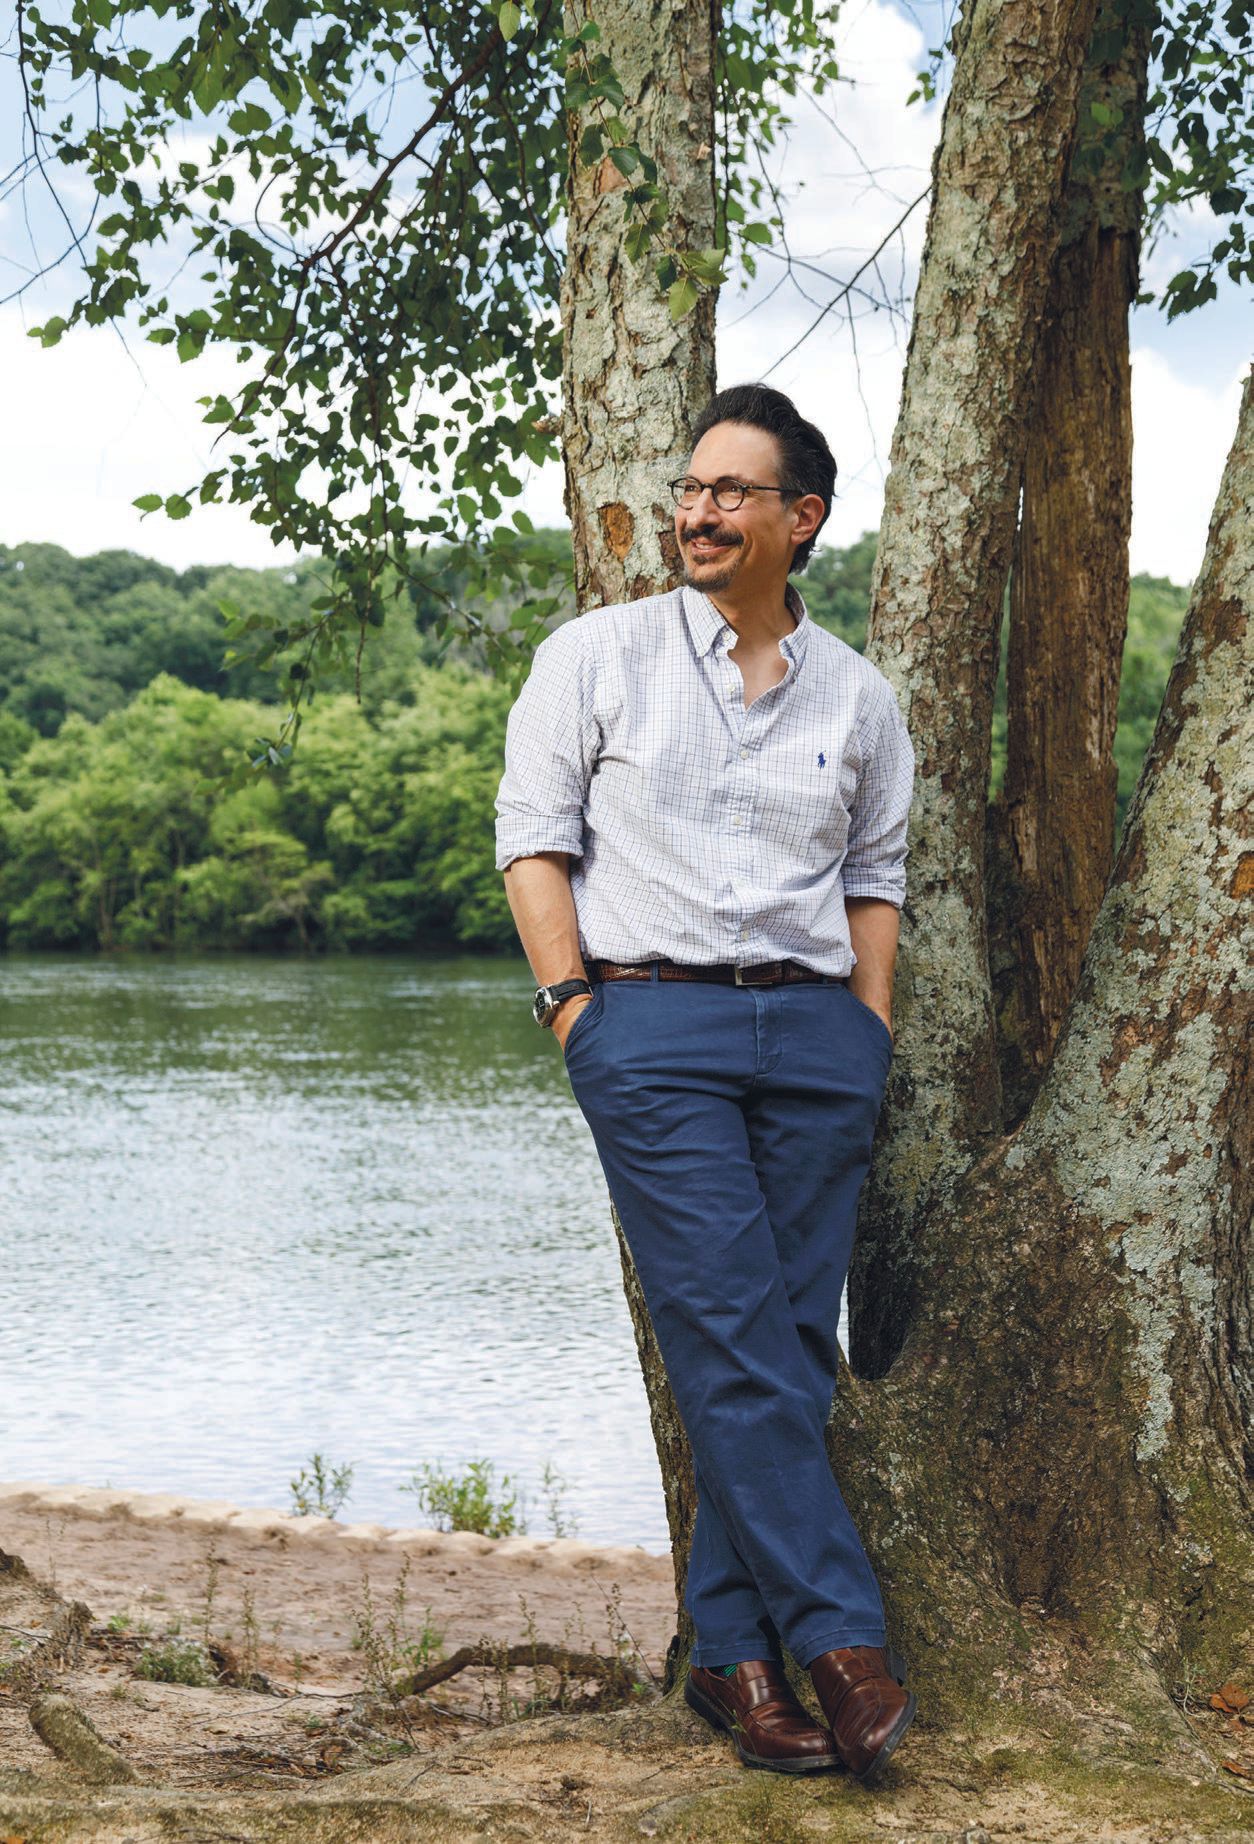 Dr. DeJoseph on the bank of the Chattahoochee River PHOTOGRAPHED BY PATRICK HEAGNEY PHOTO BY PATRICK HEAGNEY